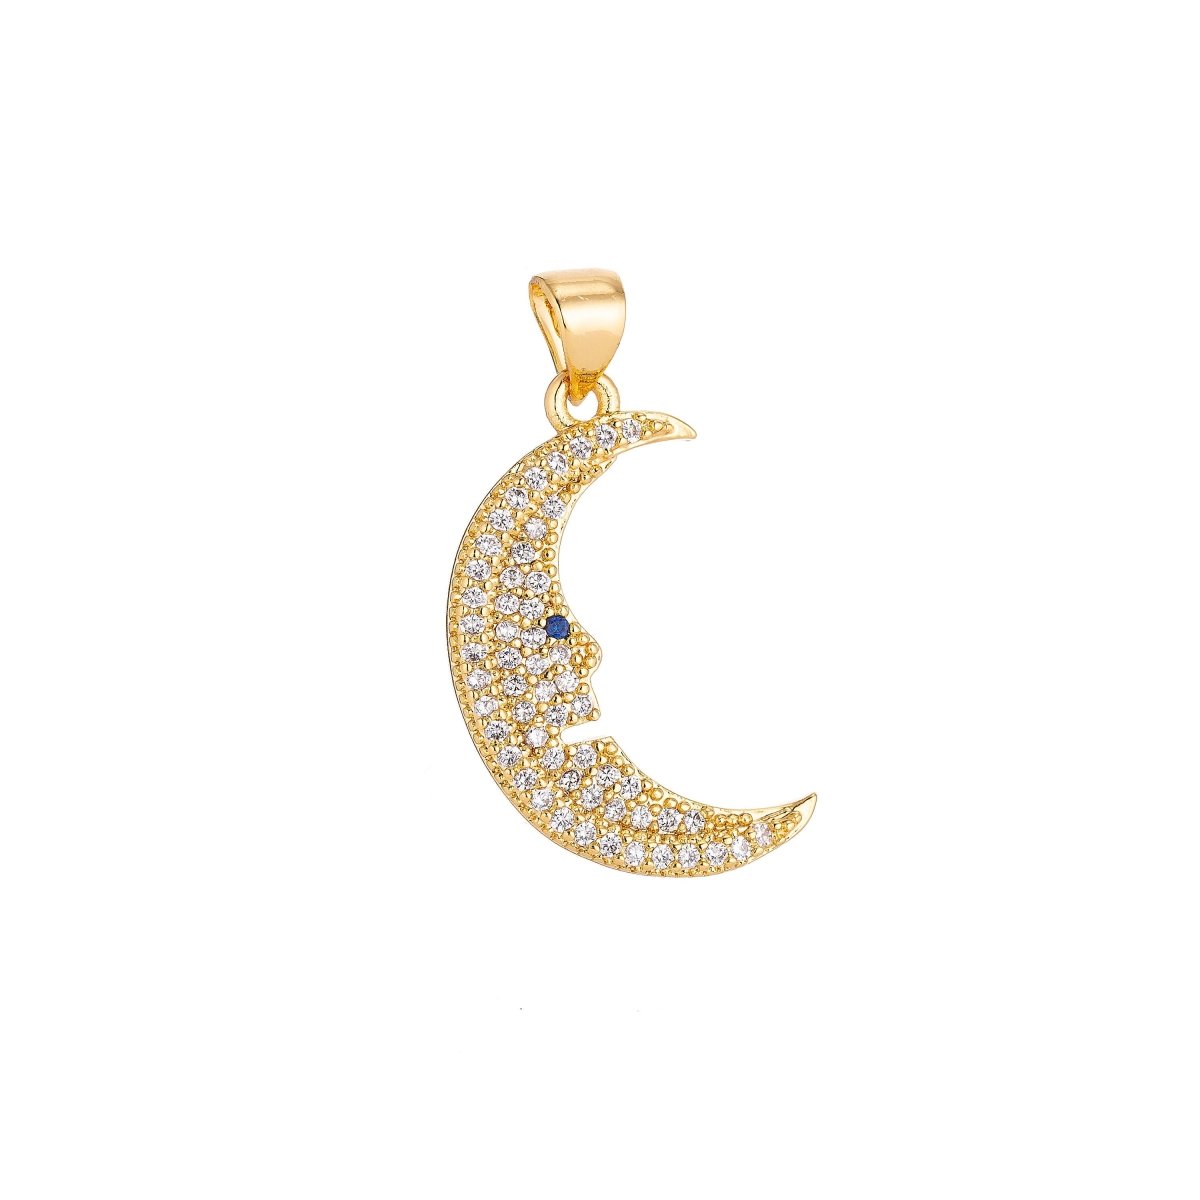 18K Gold Filled Crescent Moon Face Dream Charm Crystal Cubic Zirconia for Necklace Pendant Earring Bail Dangle Findings for Jewelry Making H-297 - DLUXCA